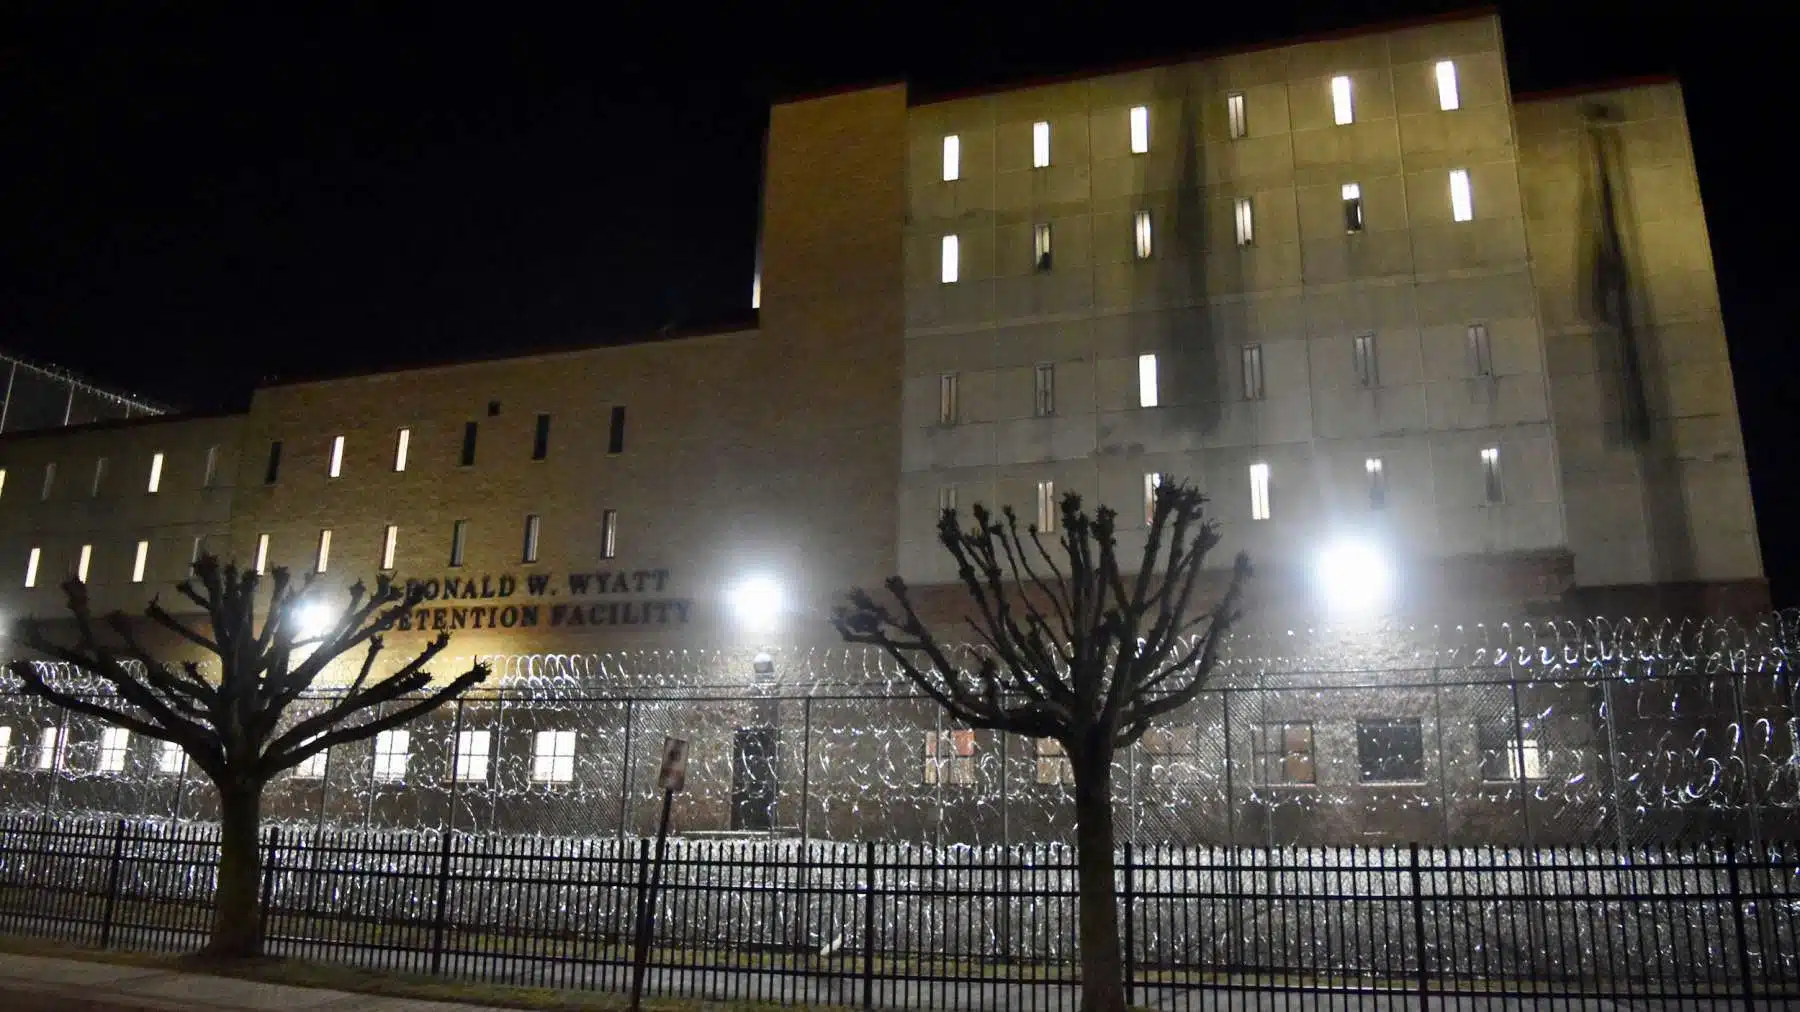 Rhode Island News: Judge orders immediate release of two health compromised ICE detainees from Wyatt during pandemic